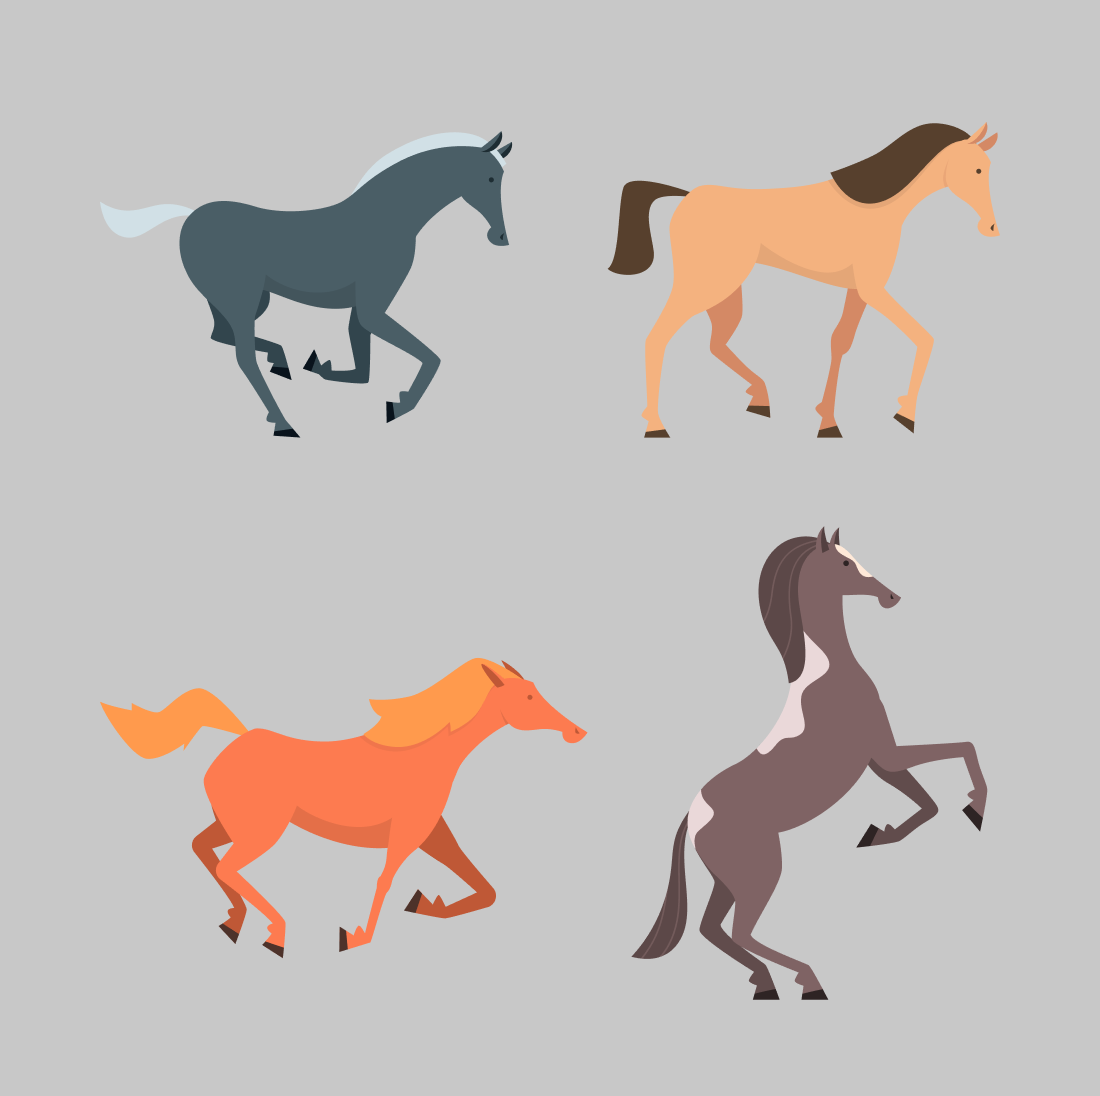 Group of four horses running across a gray background.